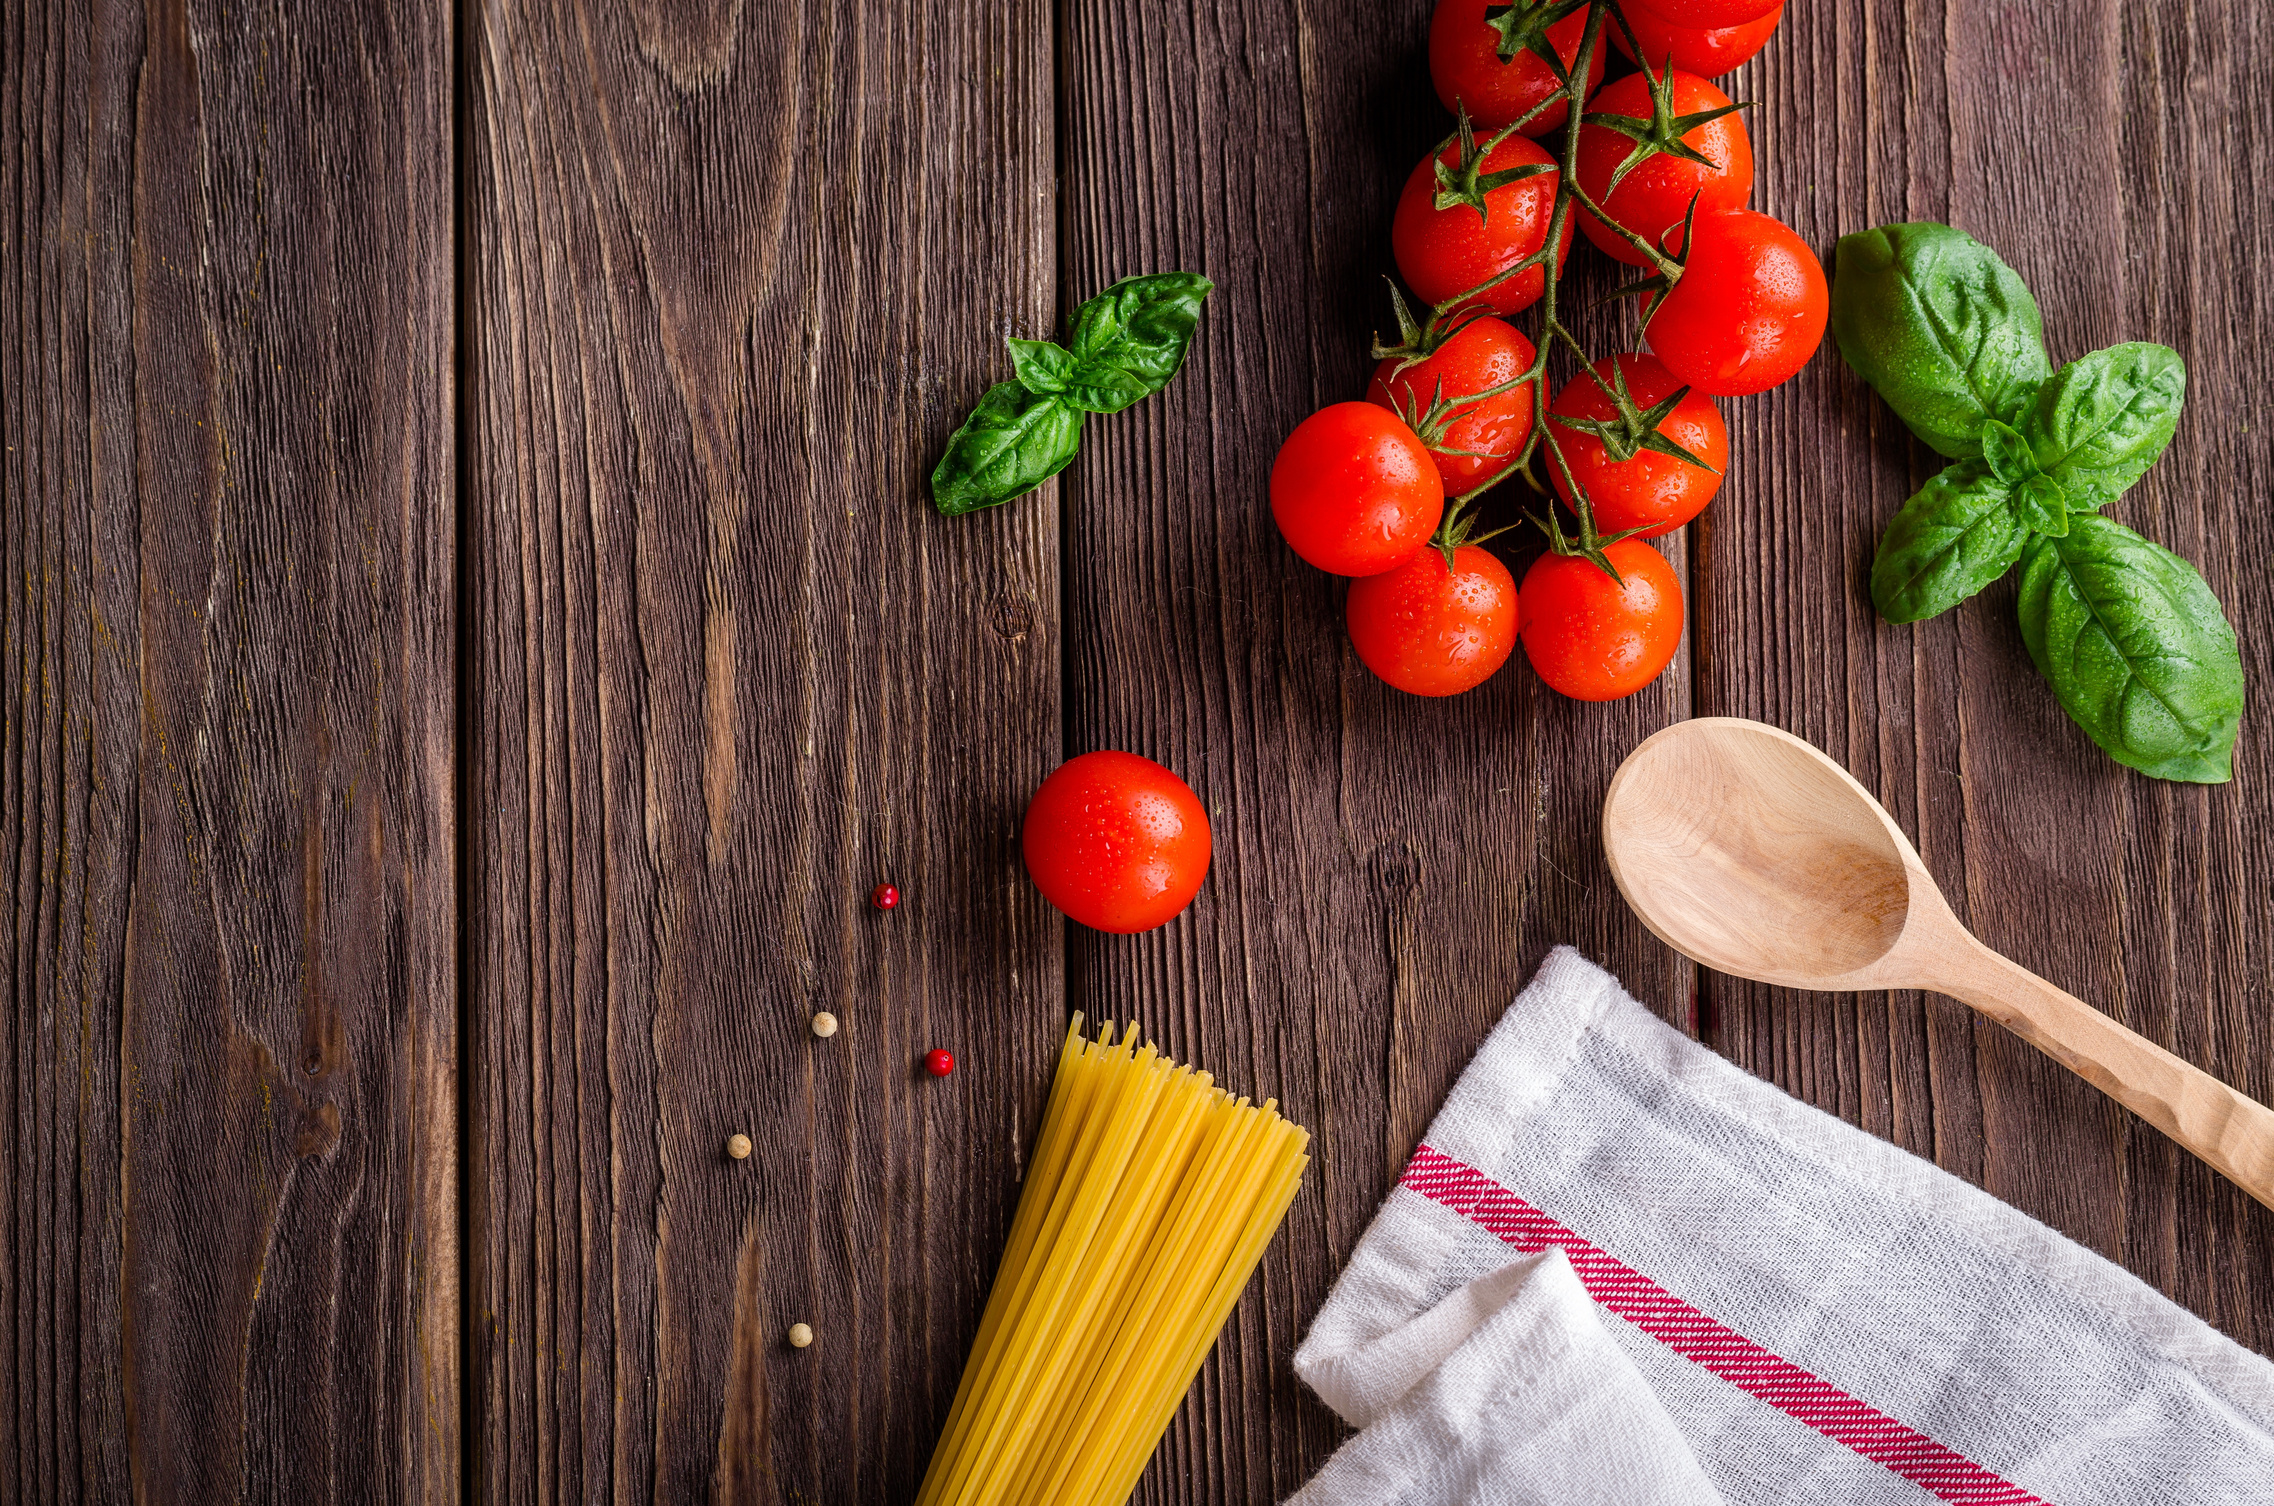 Top view of Spaghetti, Tomatoes and Basil on a Wooden Background